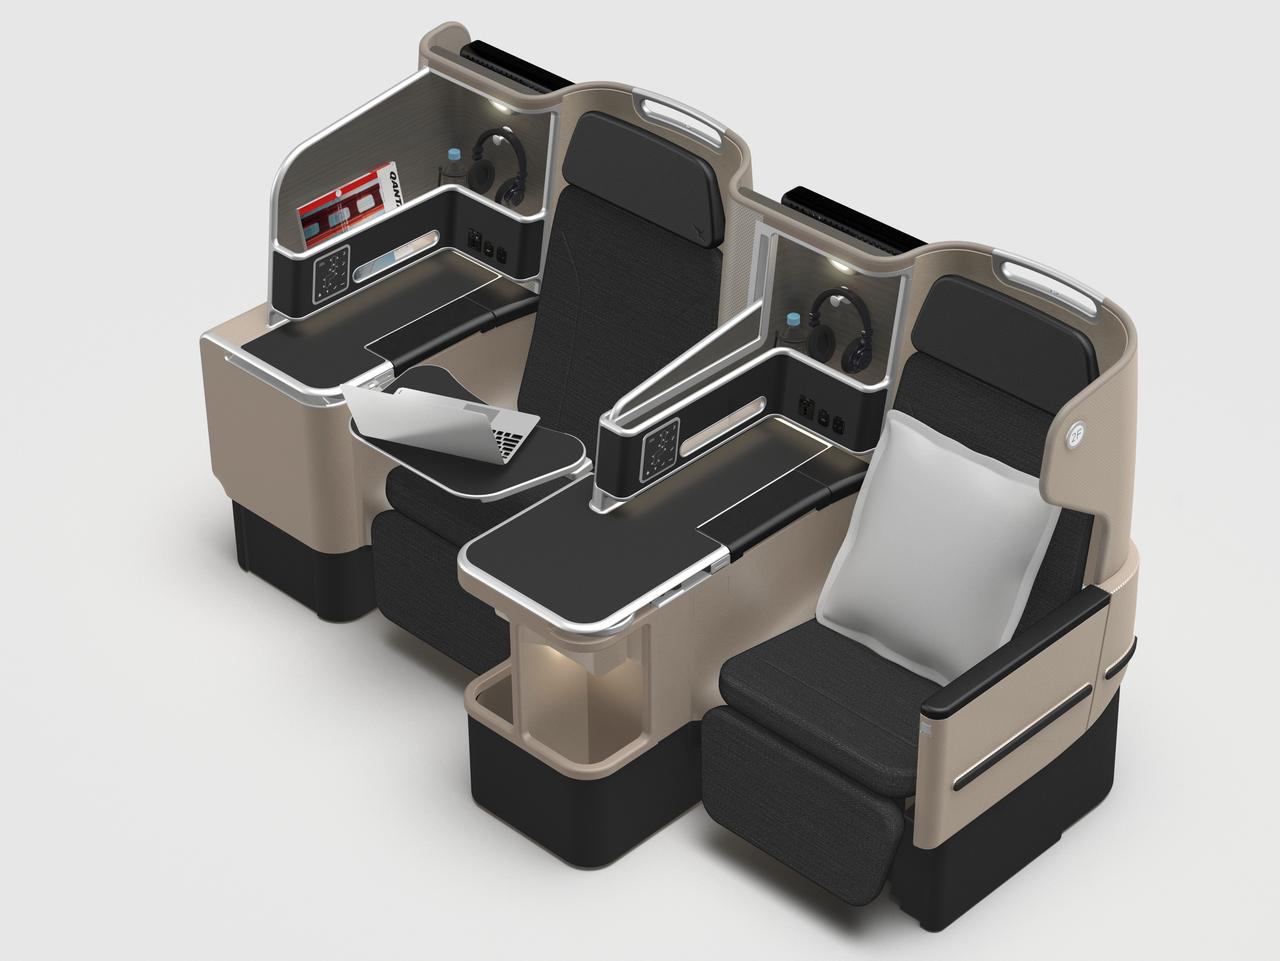 Business passengers will now be able to adjust their seat dividers.